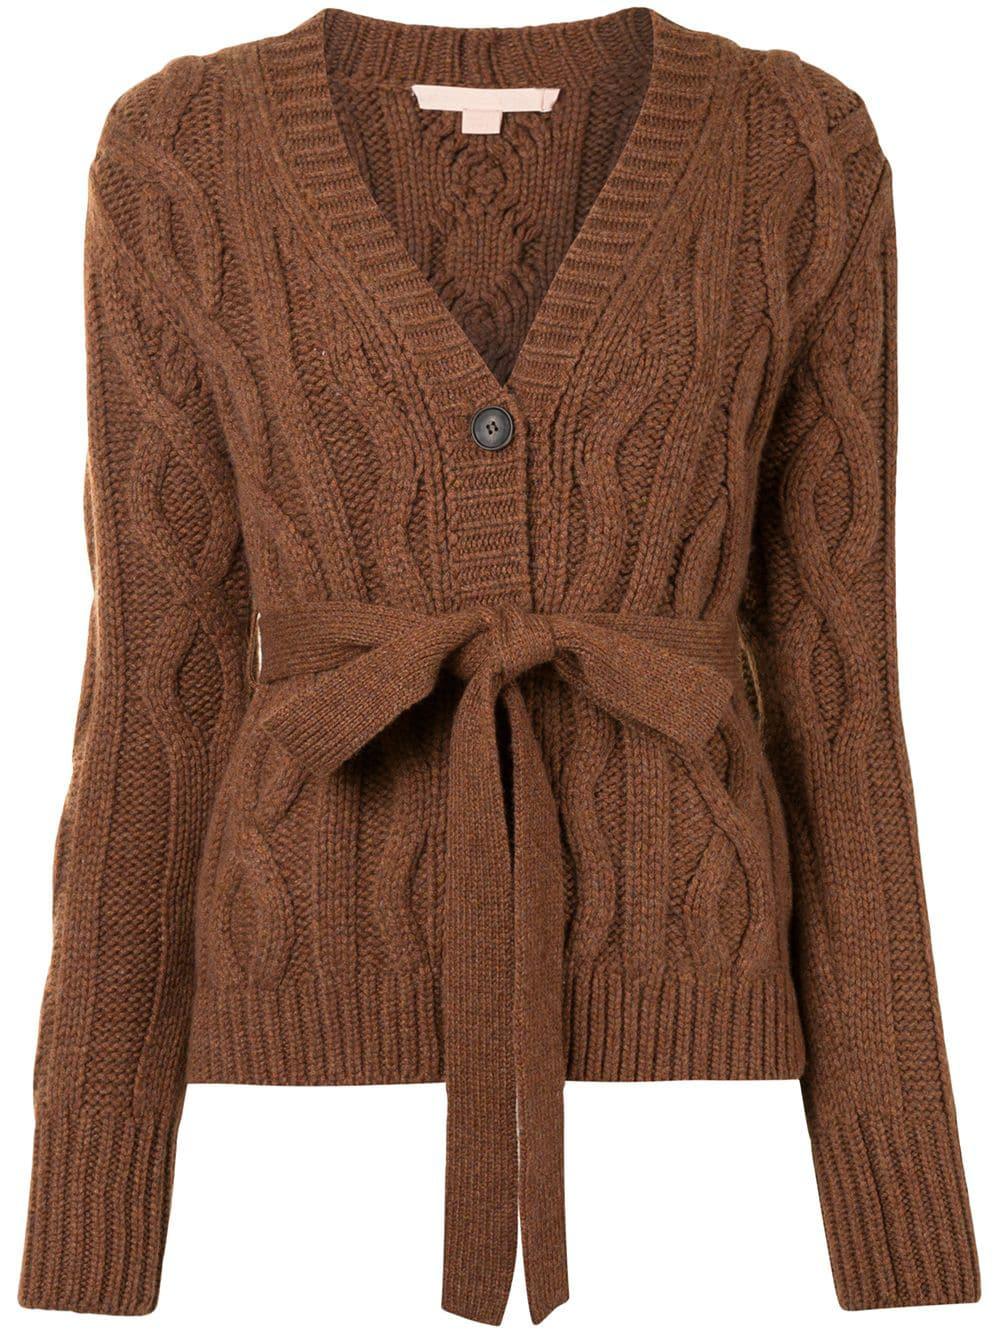 Replenish cashmere cardigan by BROCK COLLECTION